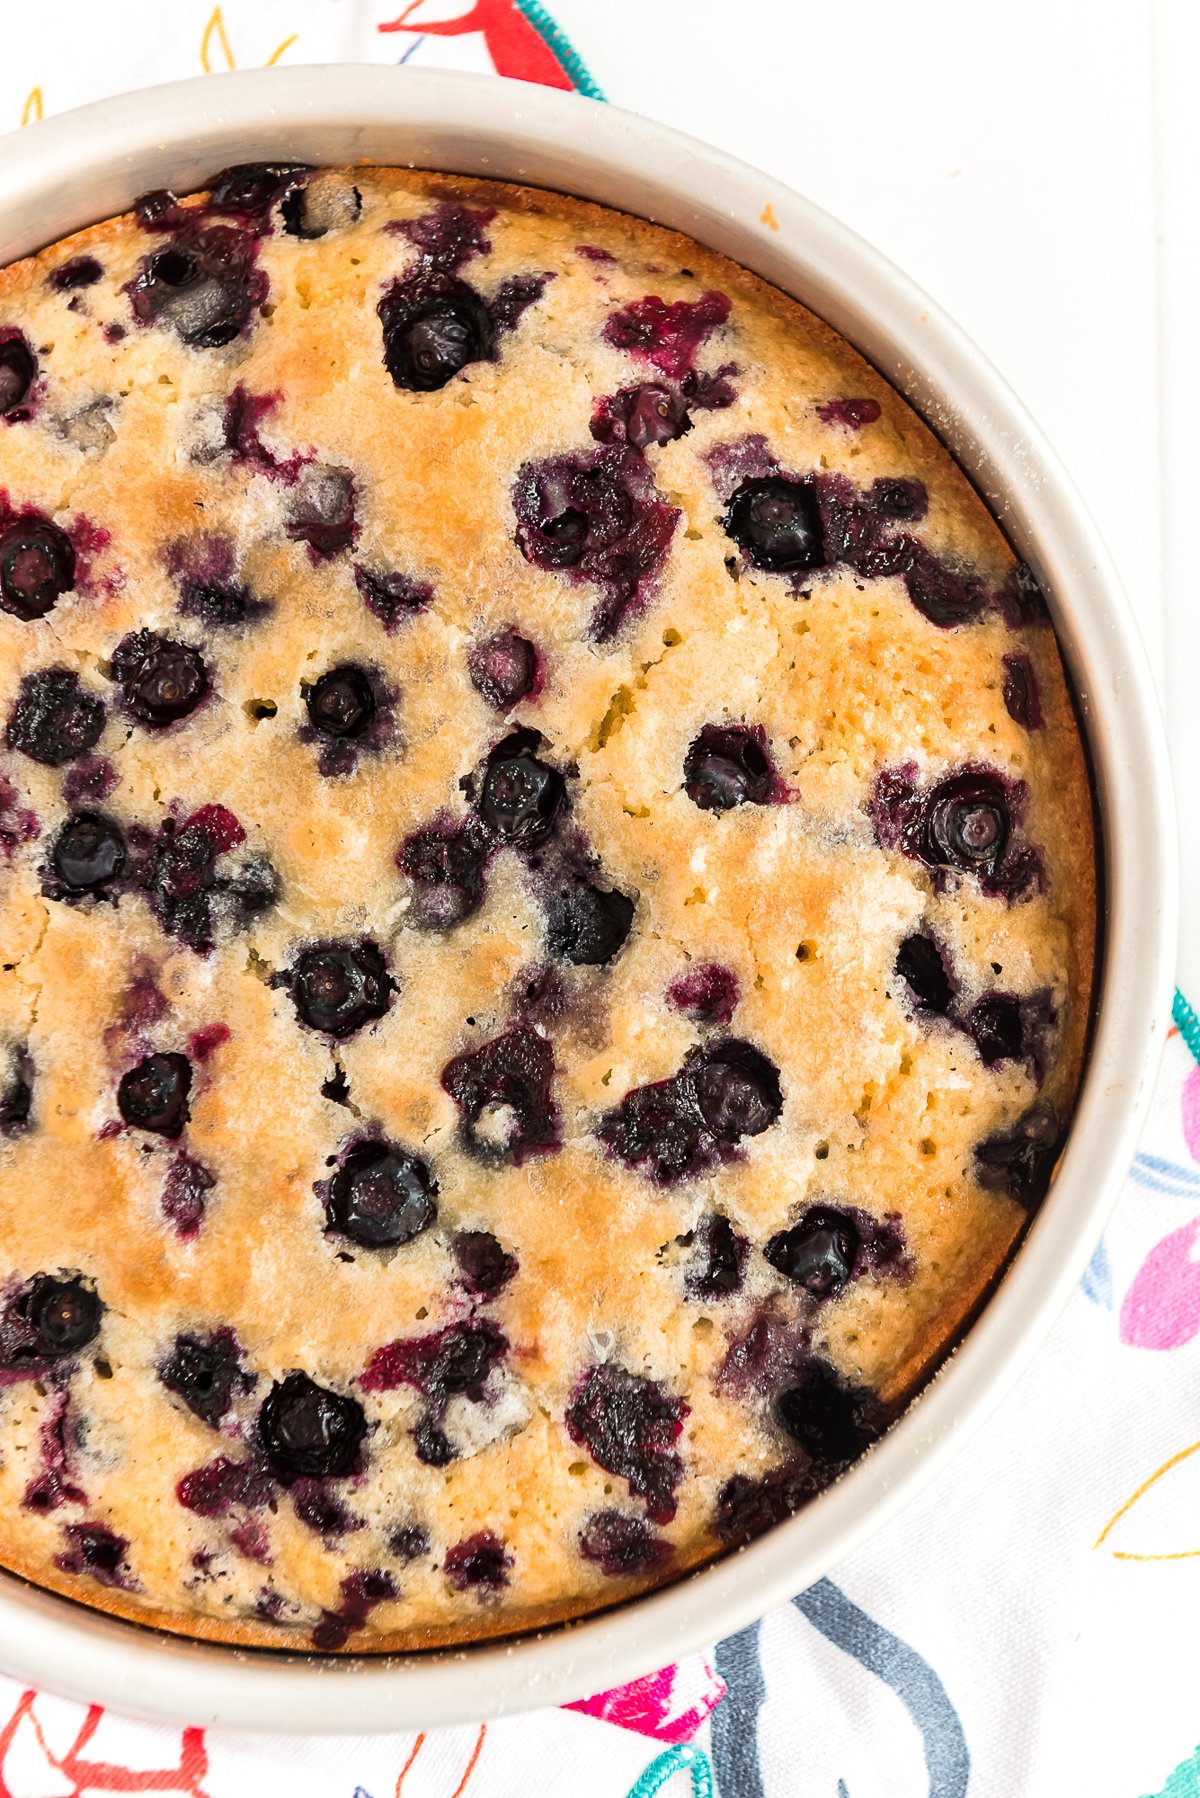 Overhead shot of a blueberry cake in a round baking pan.